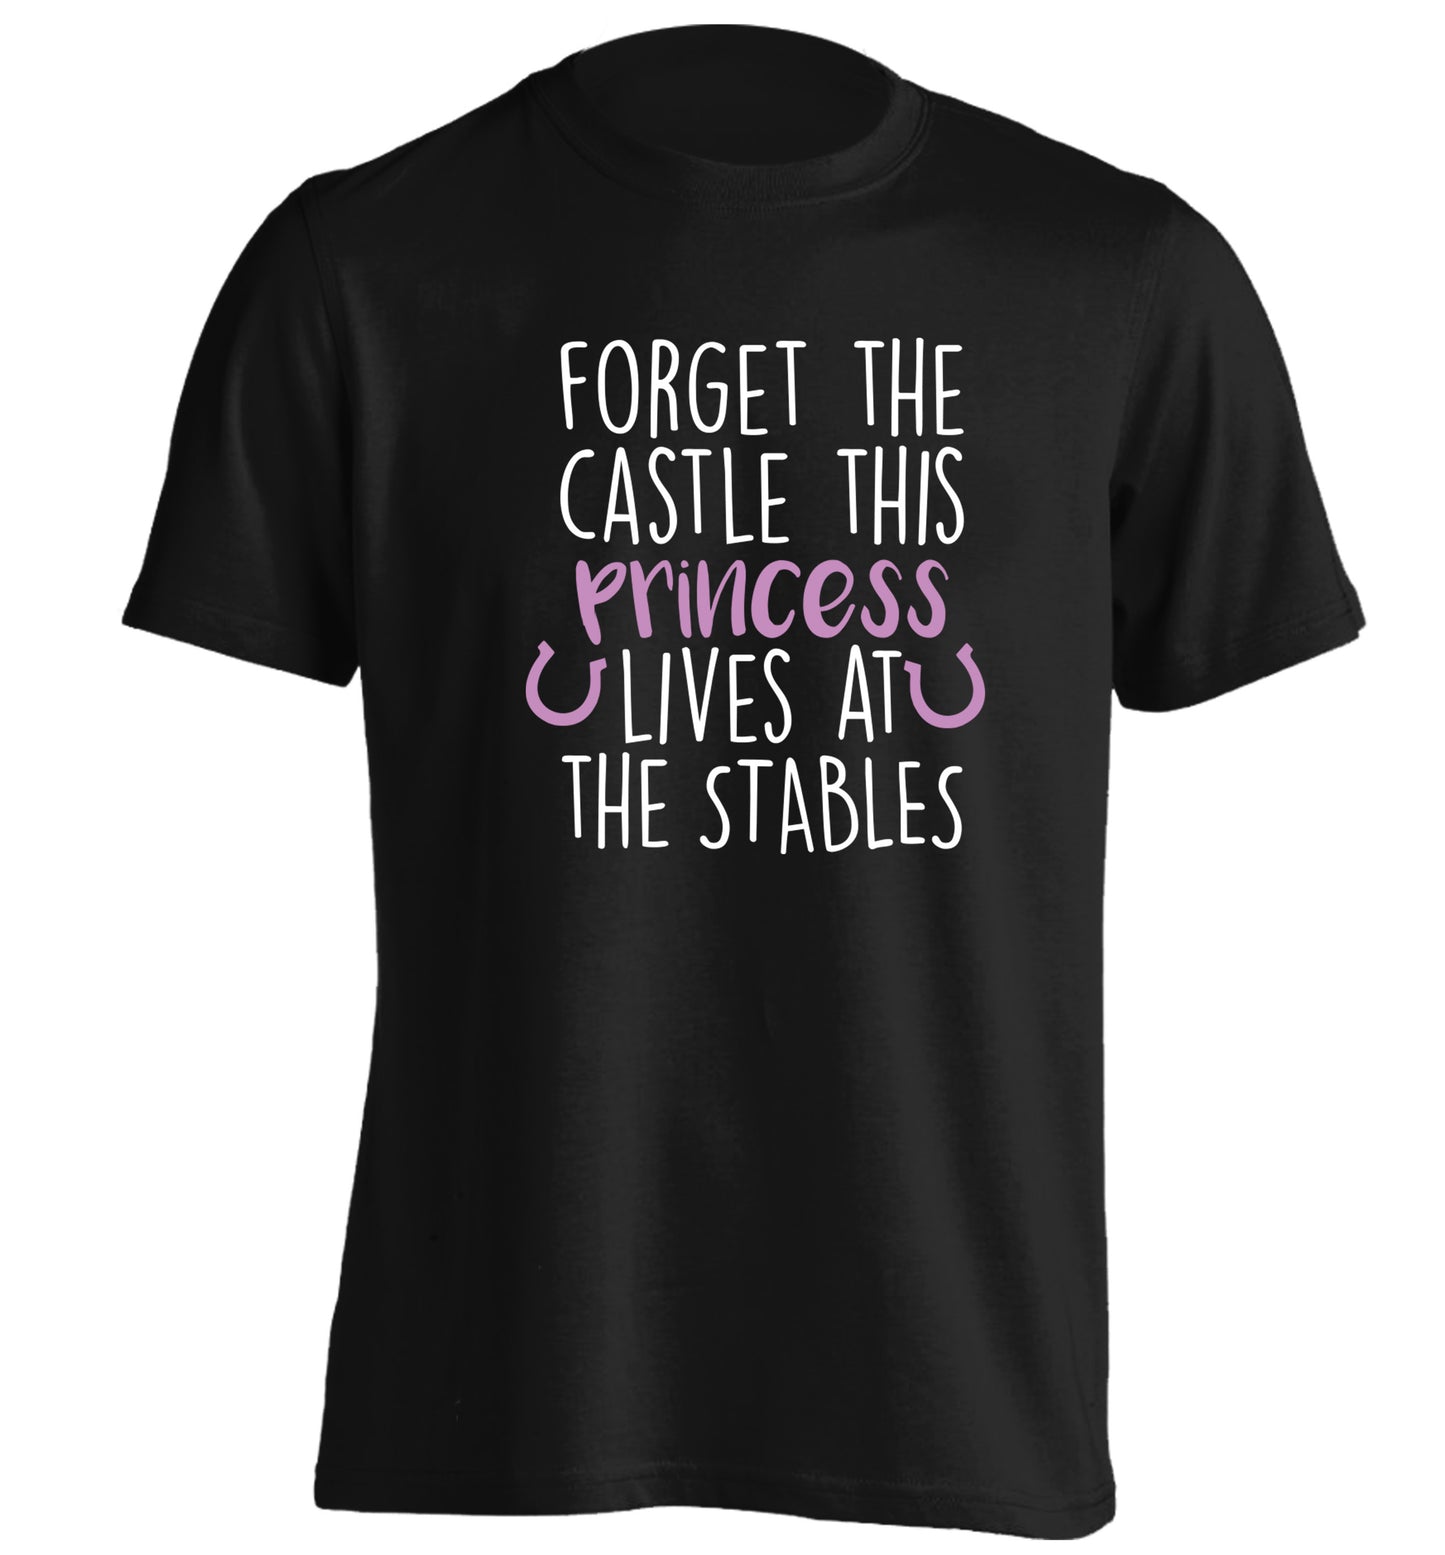 Forget the castle this princess lives at the stables adults unisex black Tshirt 2XL